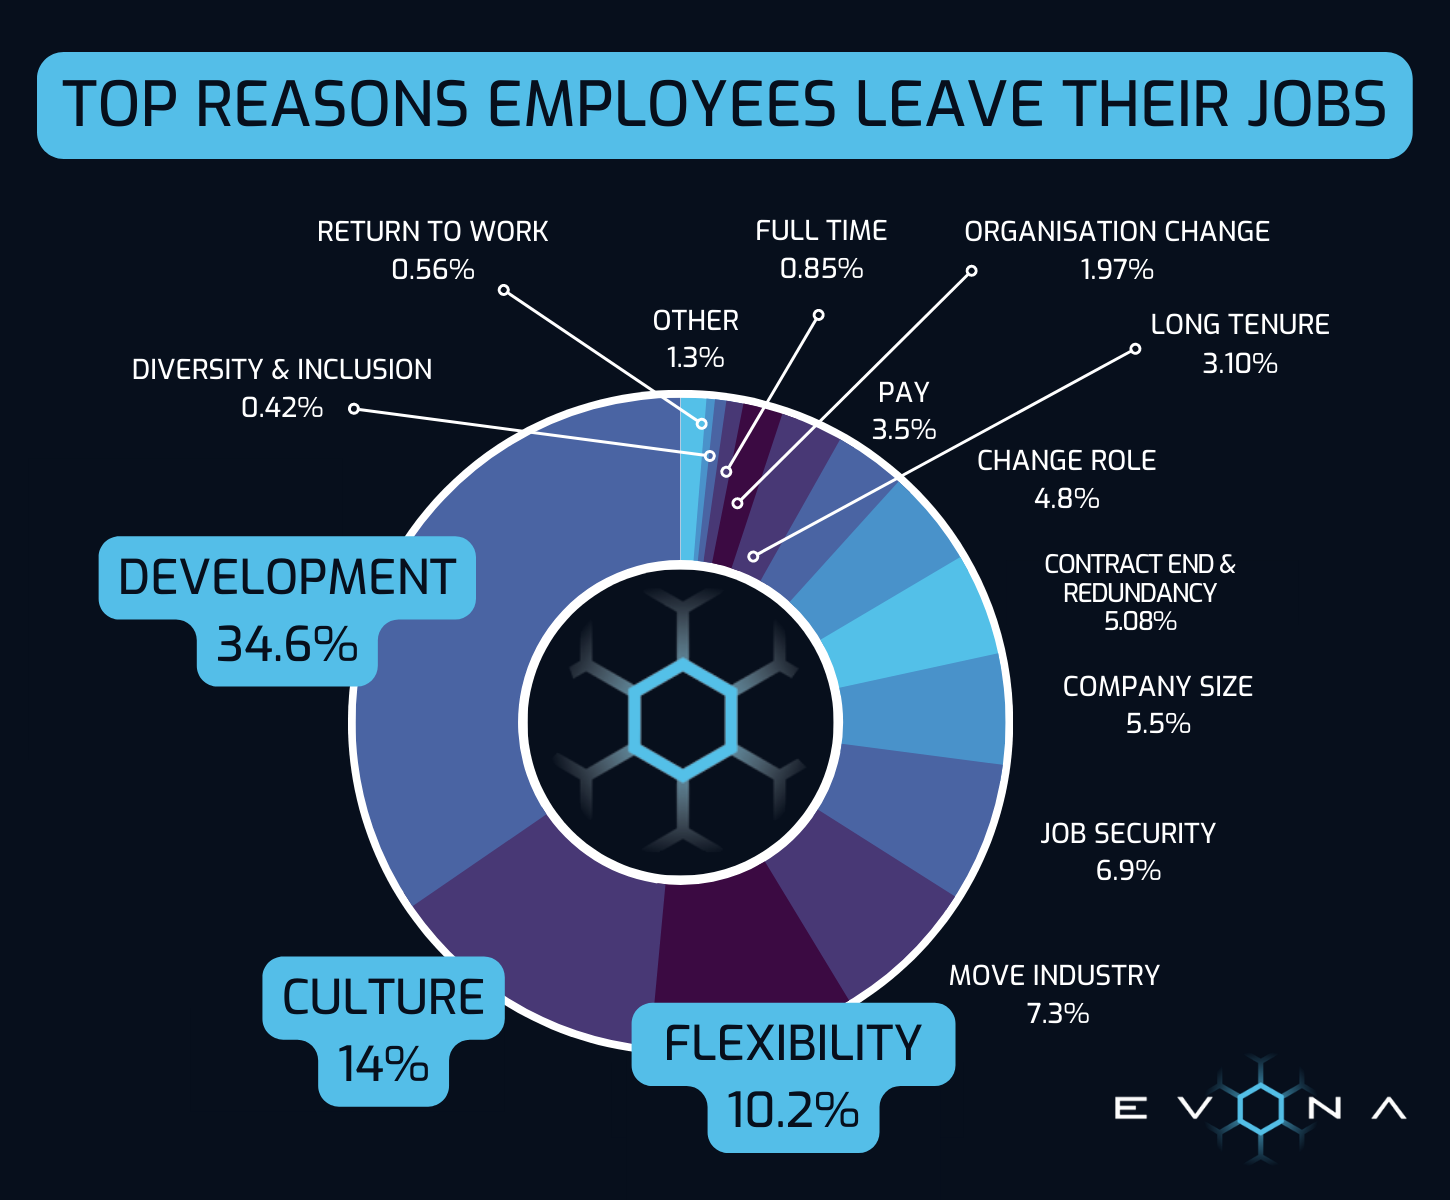 Top reasons employees leave their jobs